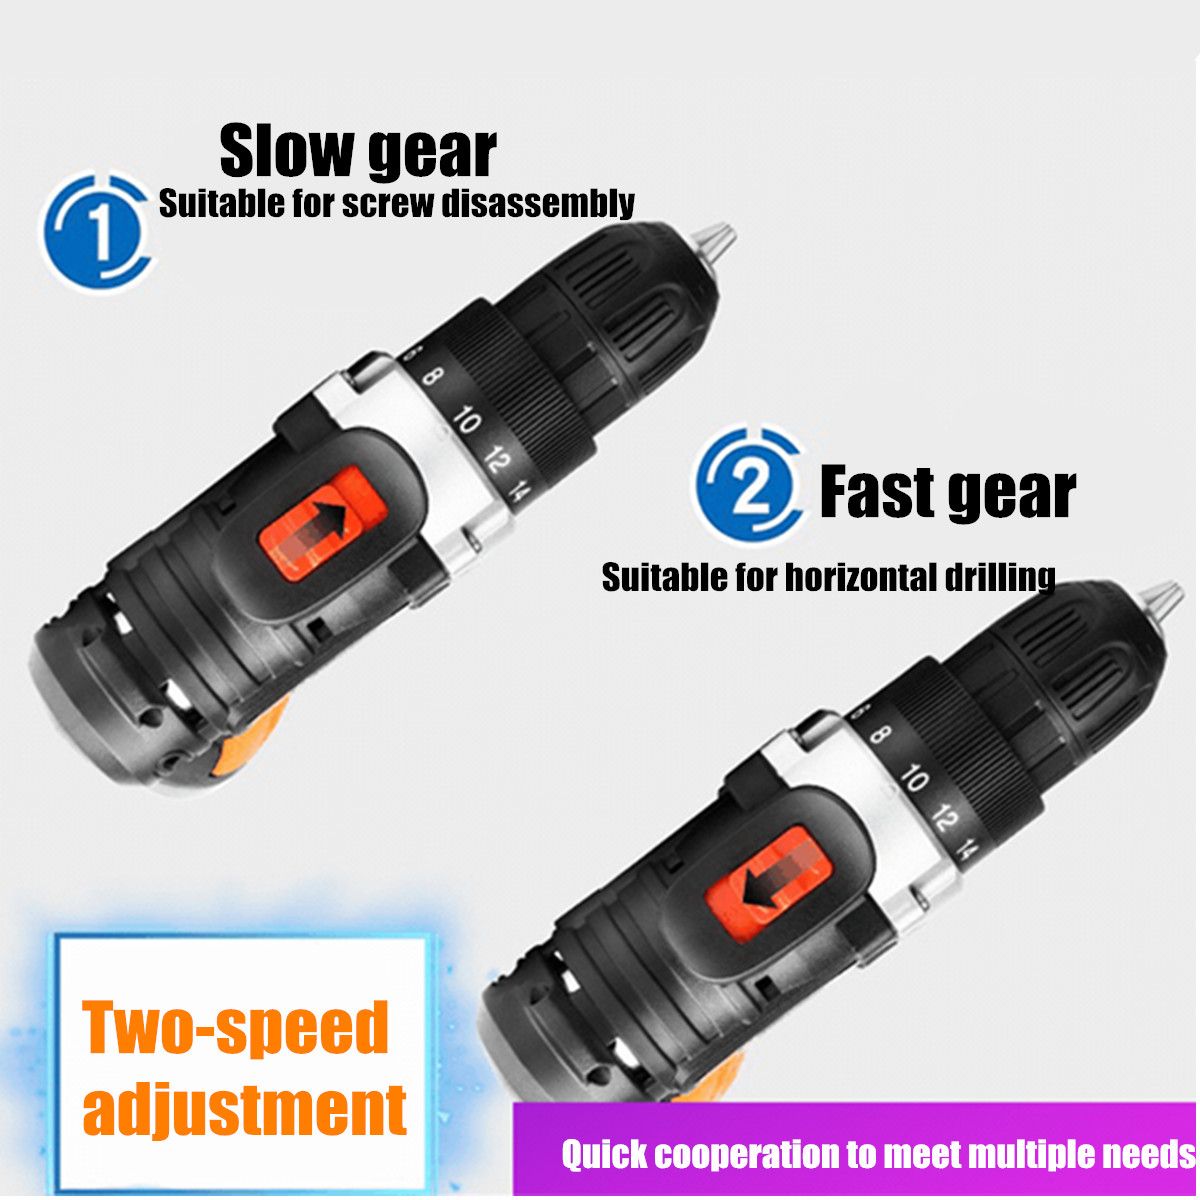 12V-15-Ah-Lithium-Battery-Power-Drill-Cordless-Electric-Hand-Drill-Bits-Set-Rechargeable-2-Speed-Ele-1571968